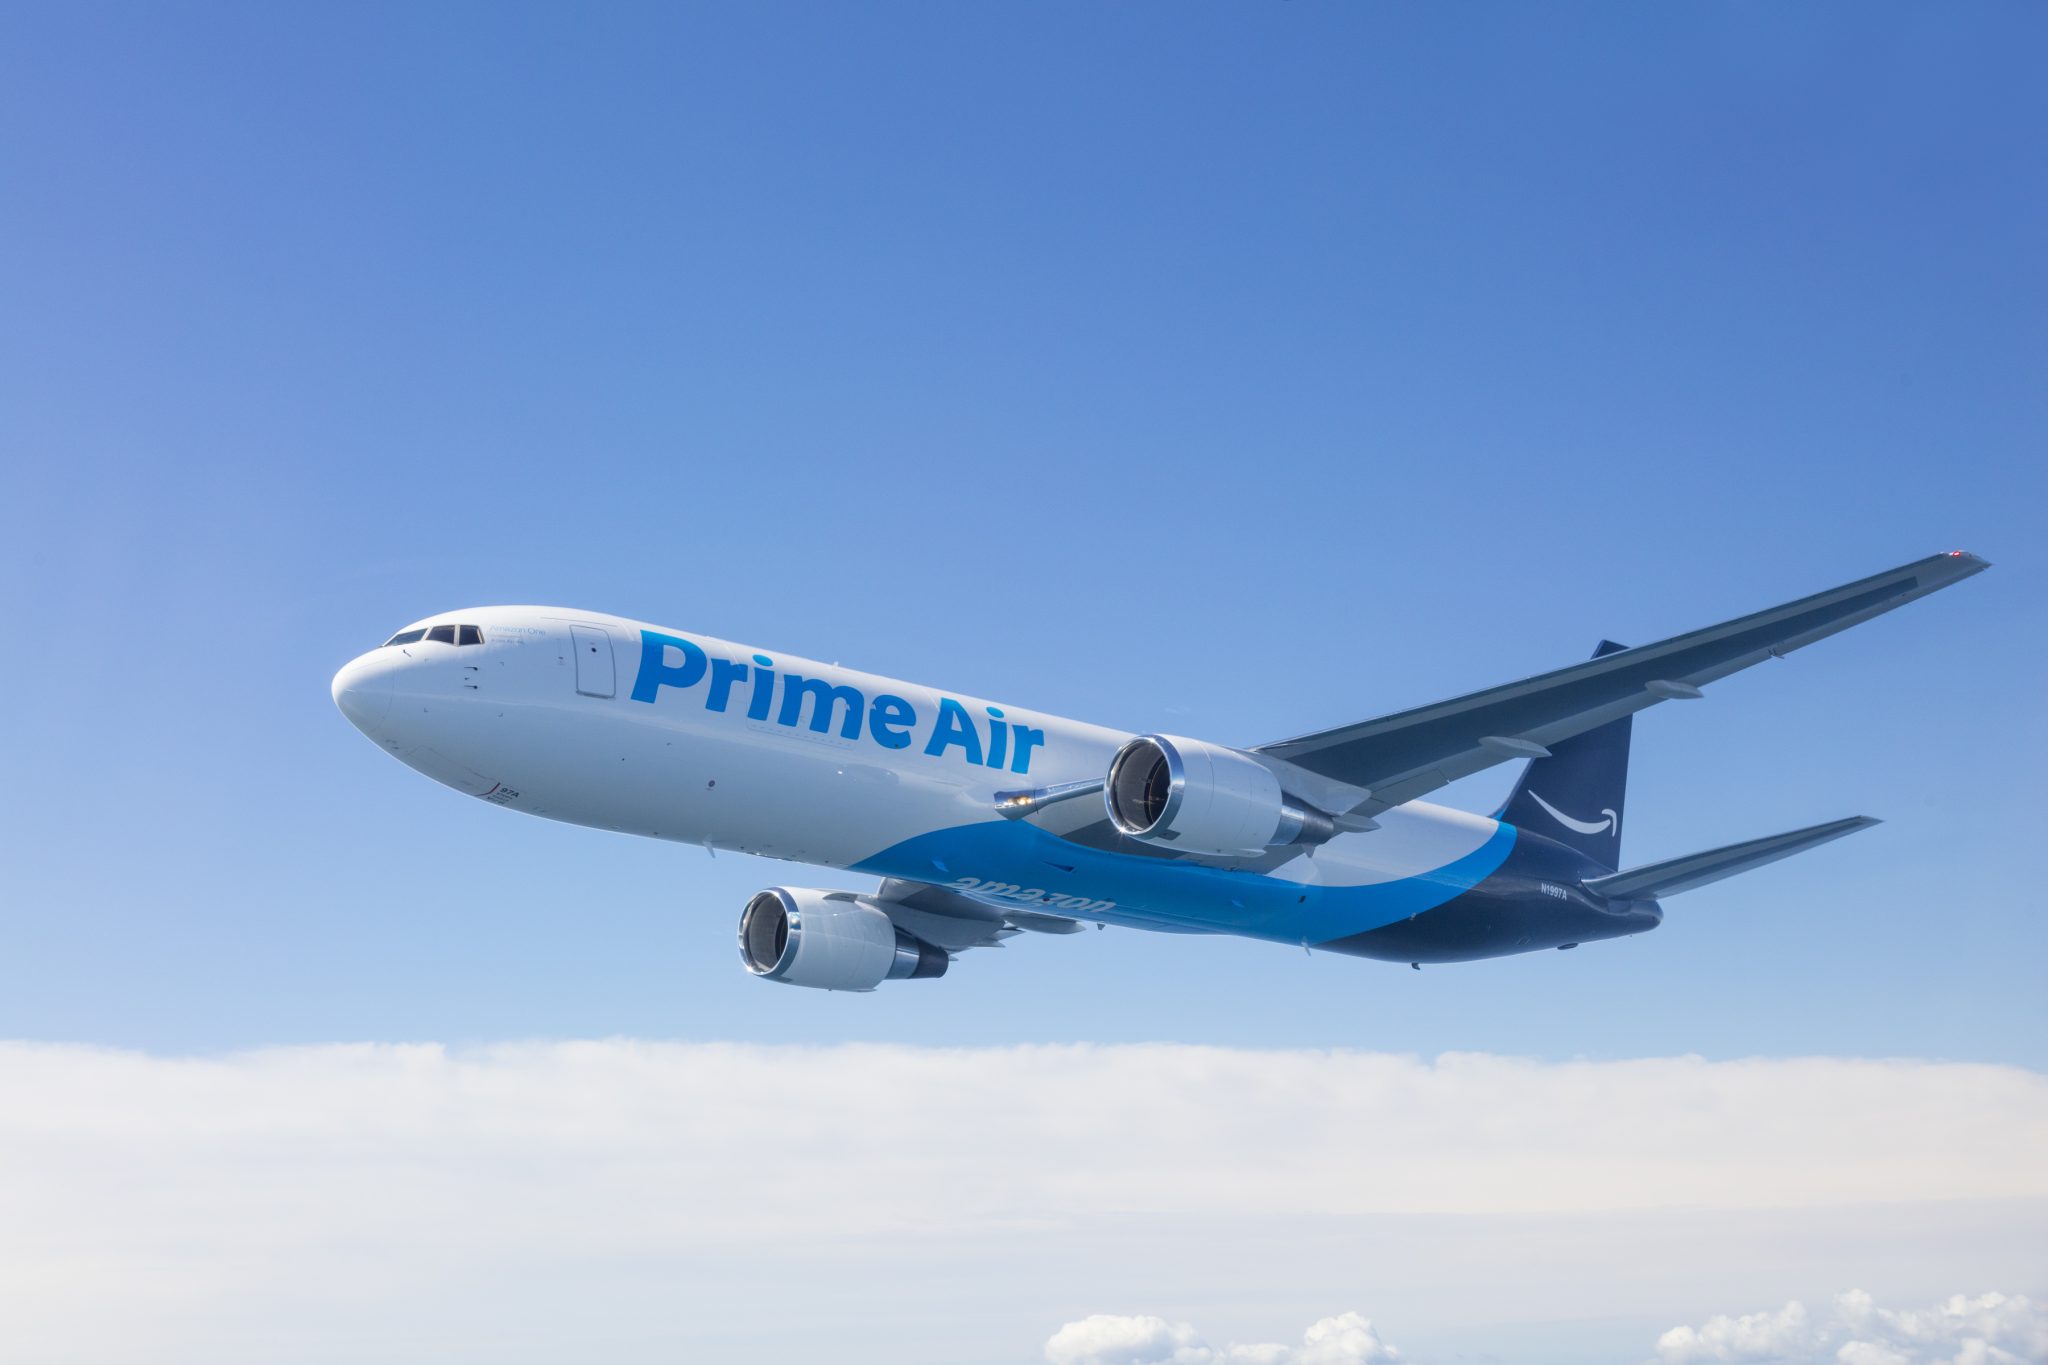 Could Amazon take flight in the travel industry? It's Prime Air cargo jet is pictured above.